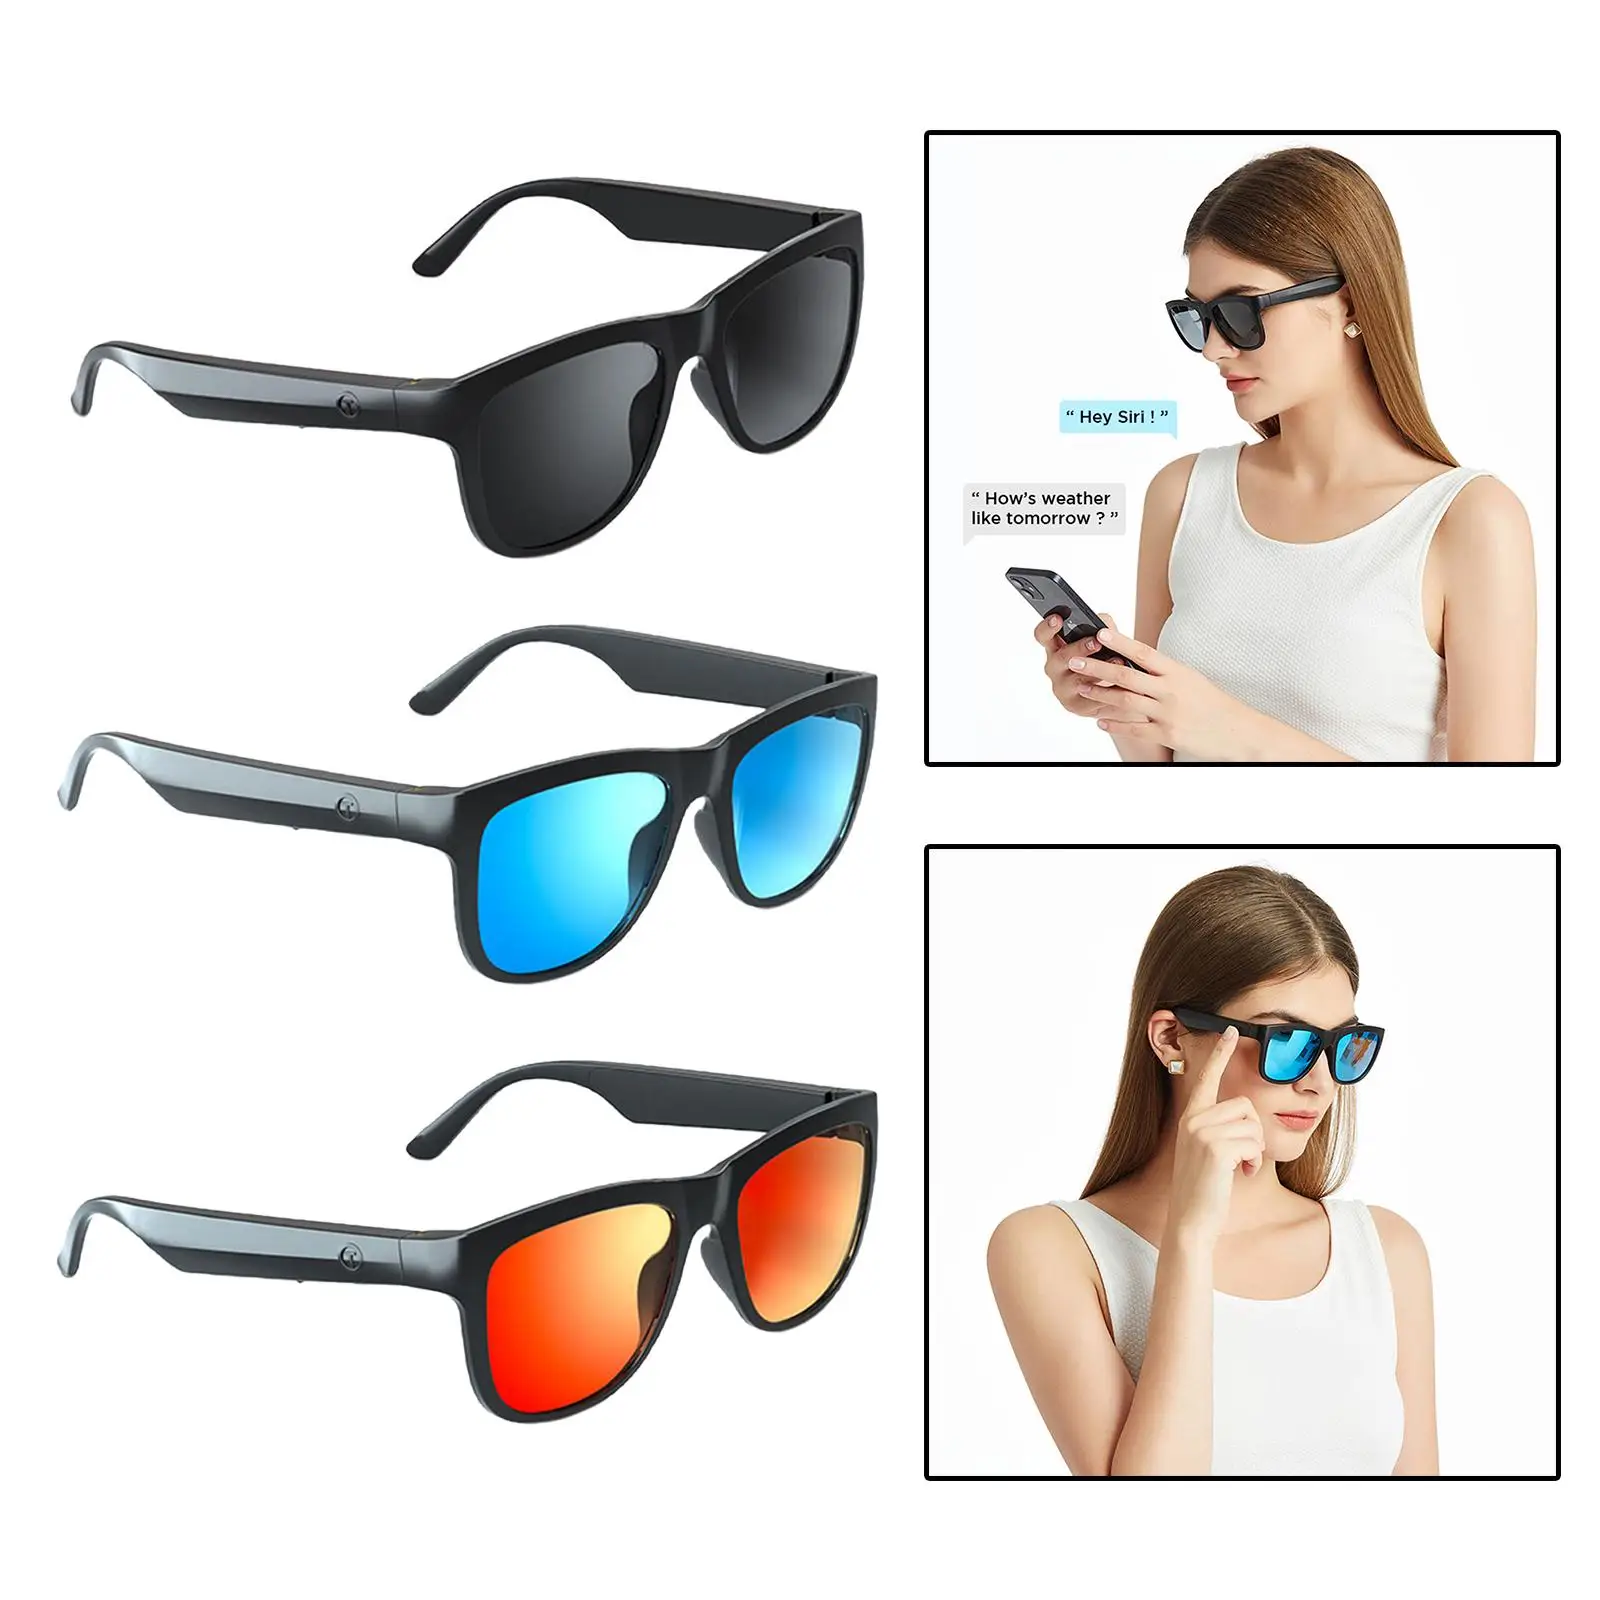 Bluetooth 5.0 Smart Glasses Hands Free Calling Wireless for Fitness Running Bluetooth Audio Smart Glasses sunglasses speakers